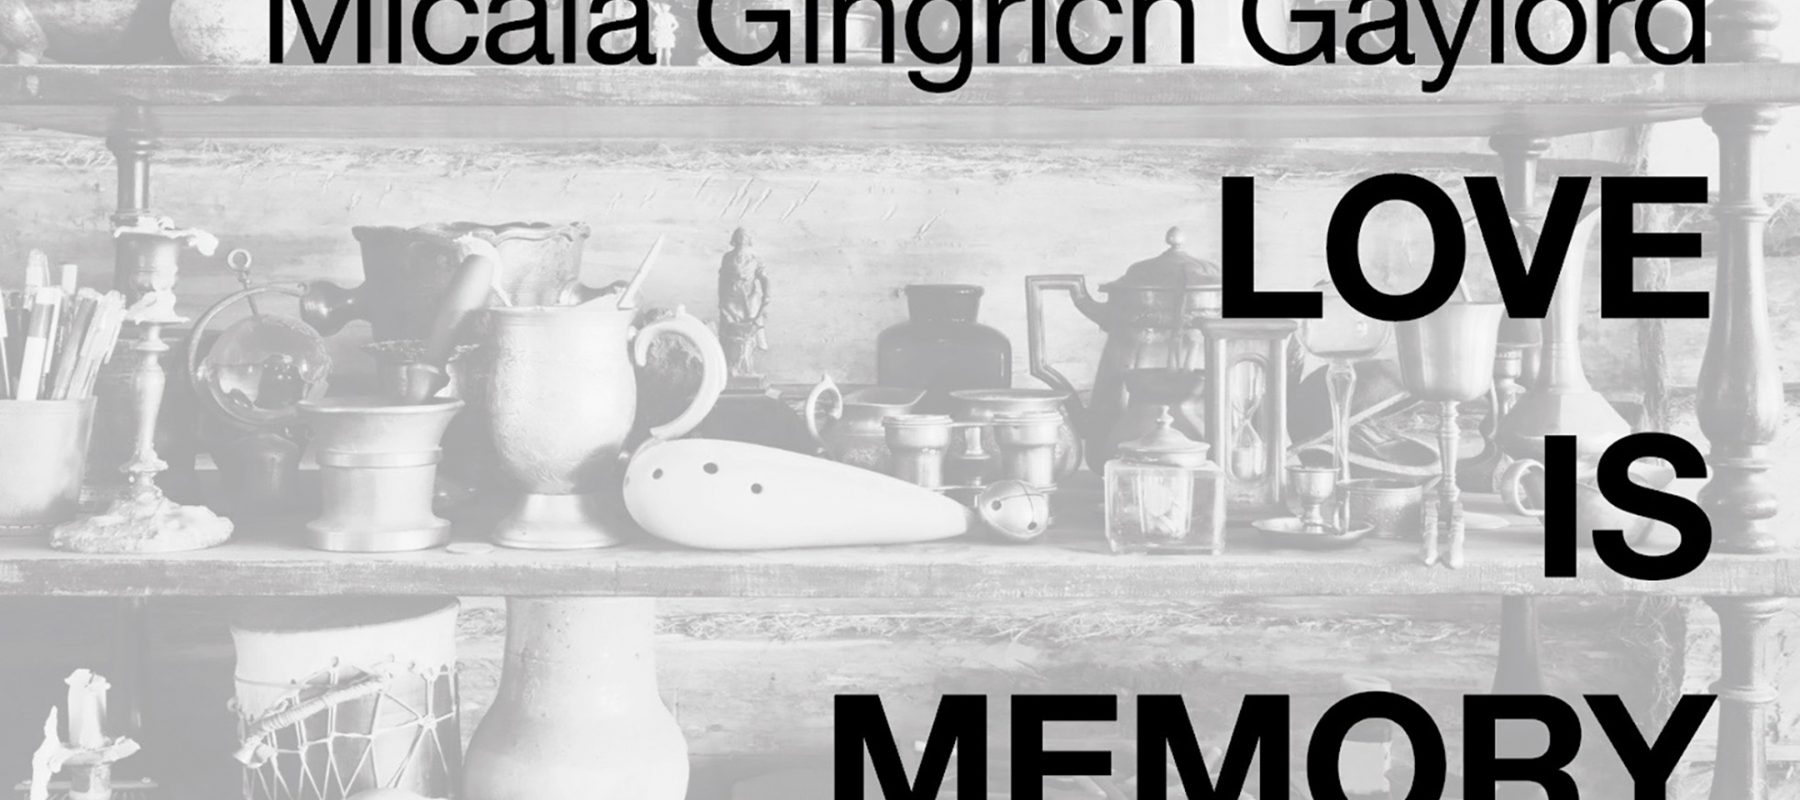 Micala Gingrich Gaylord: Love Is Memory. The photo shows many various items on a shelf that may hold meaning for people: a vase, a pitcher, a book, a candlestick, art supplies and other objects.